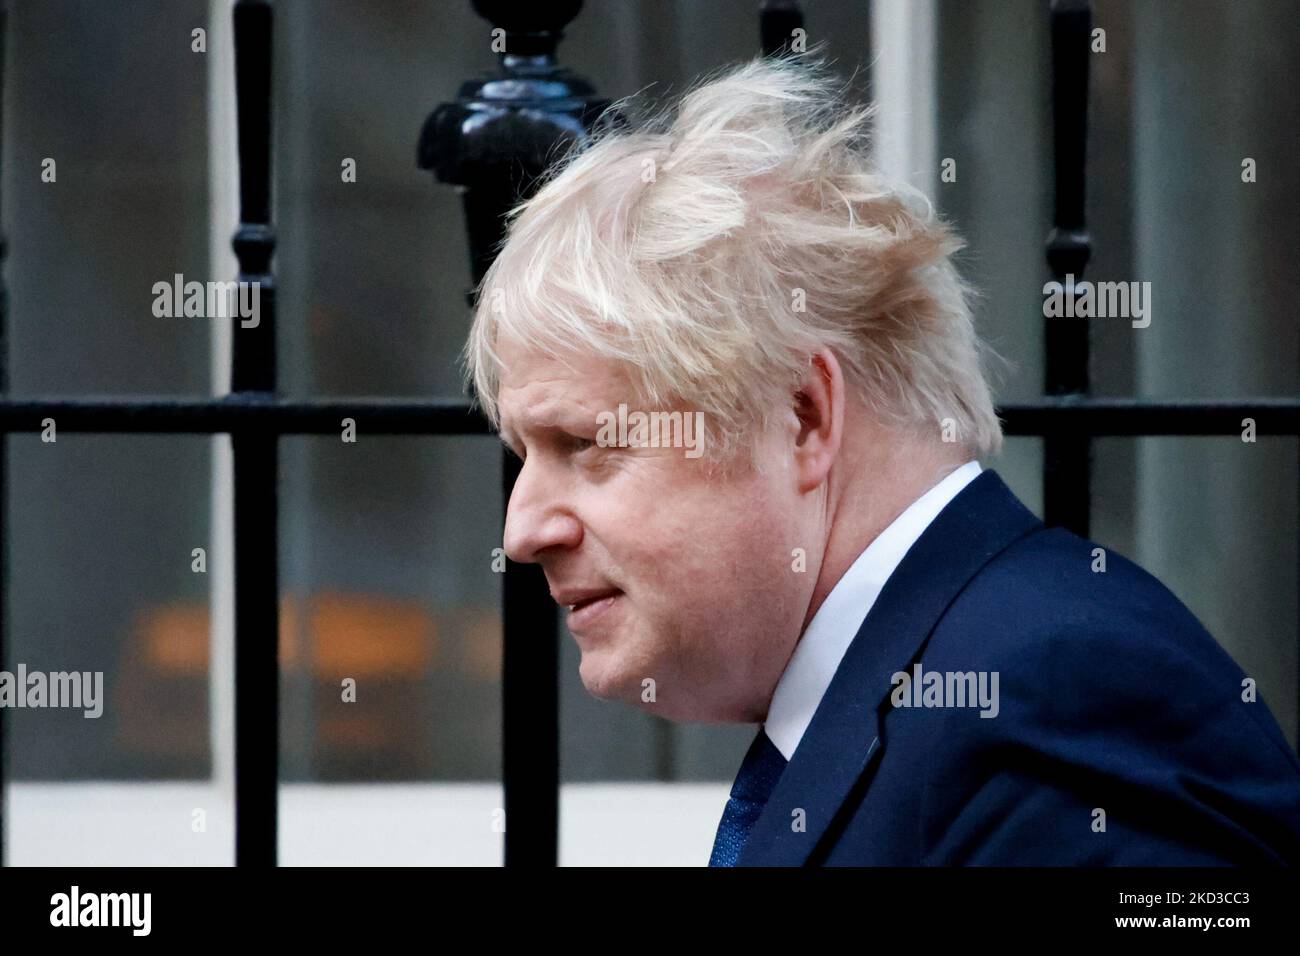 British Prime Minister Boris Johnson leaves 10 Downing Street to speak on the situation in Ukraine to MPs in the House of Commons in London, England, on February 24, 2022. Johnson has vowed to impose huge economic sanctions on Russia in response to its overnight invasion of Ukraine. (Photo by David Cliff/NurPhoto) Stock Photo